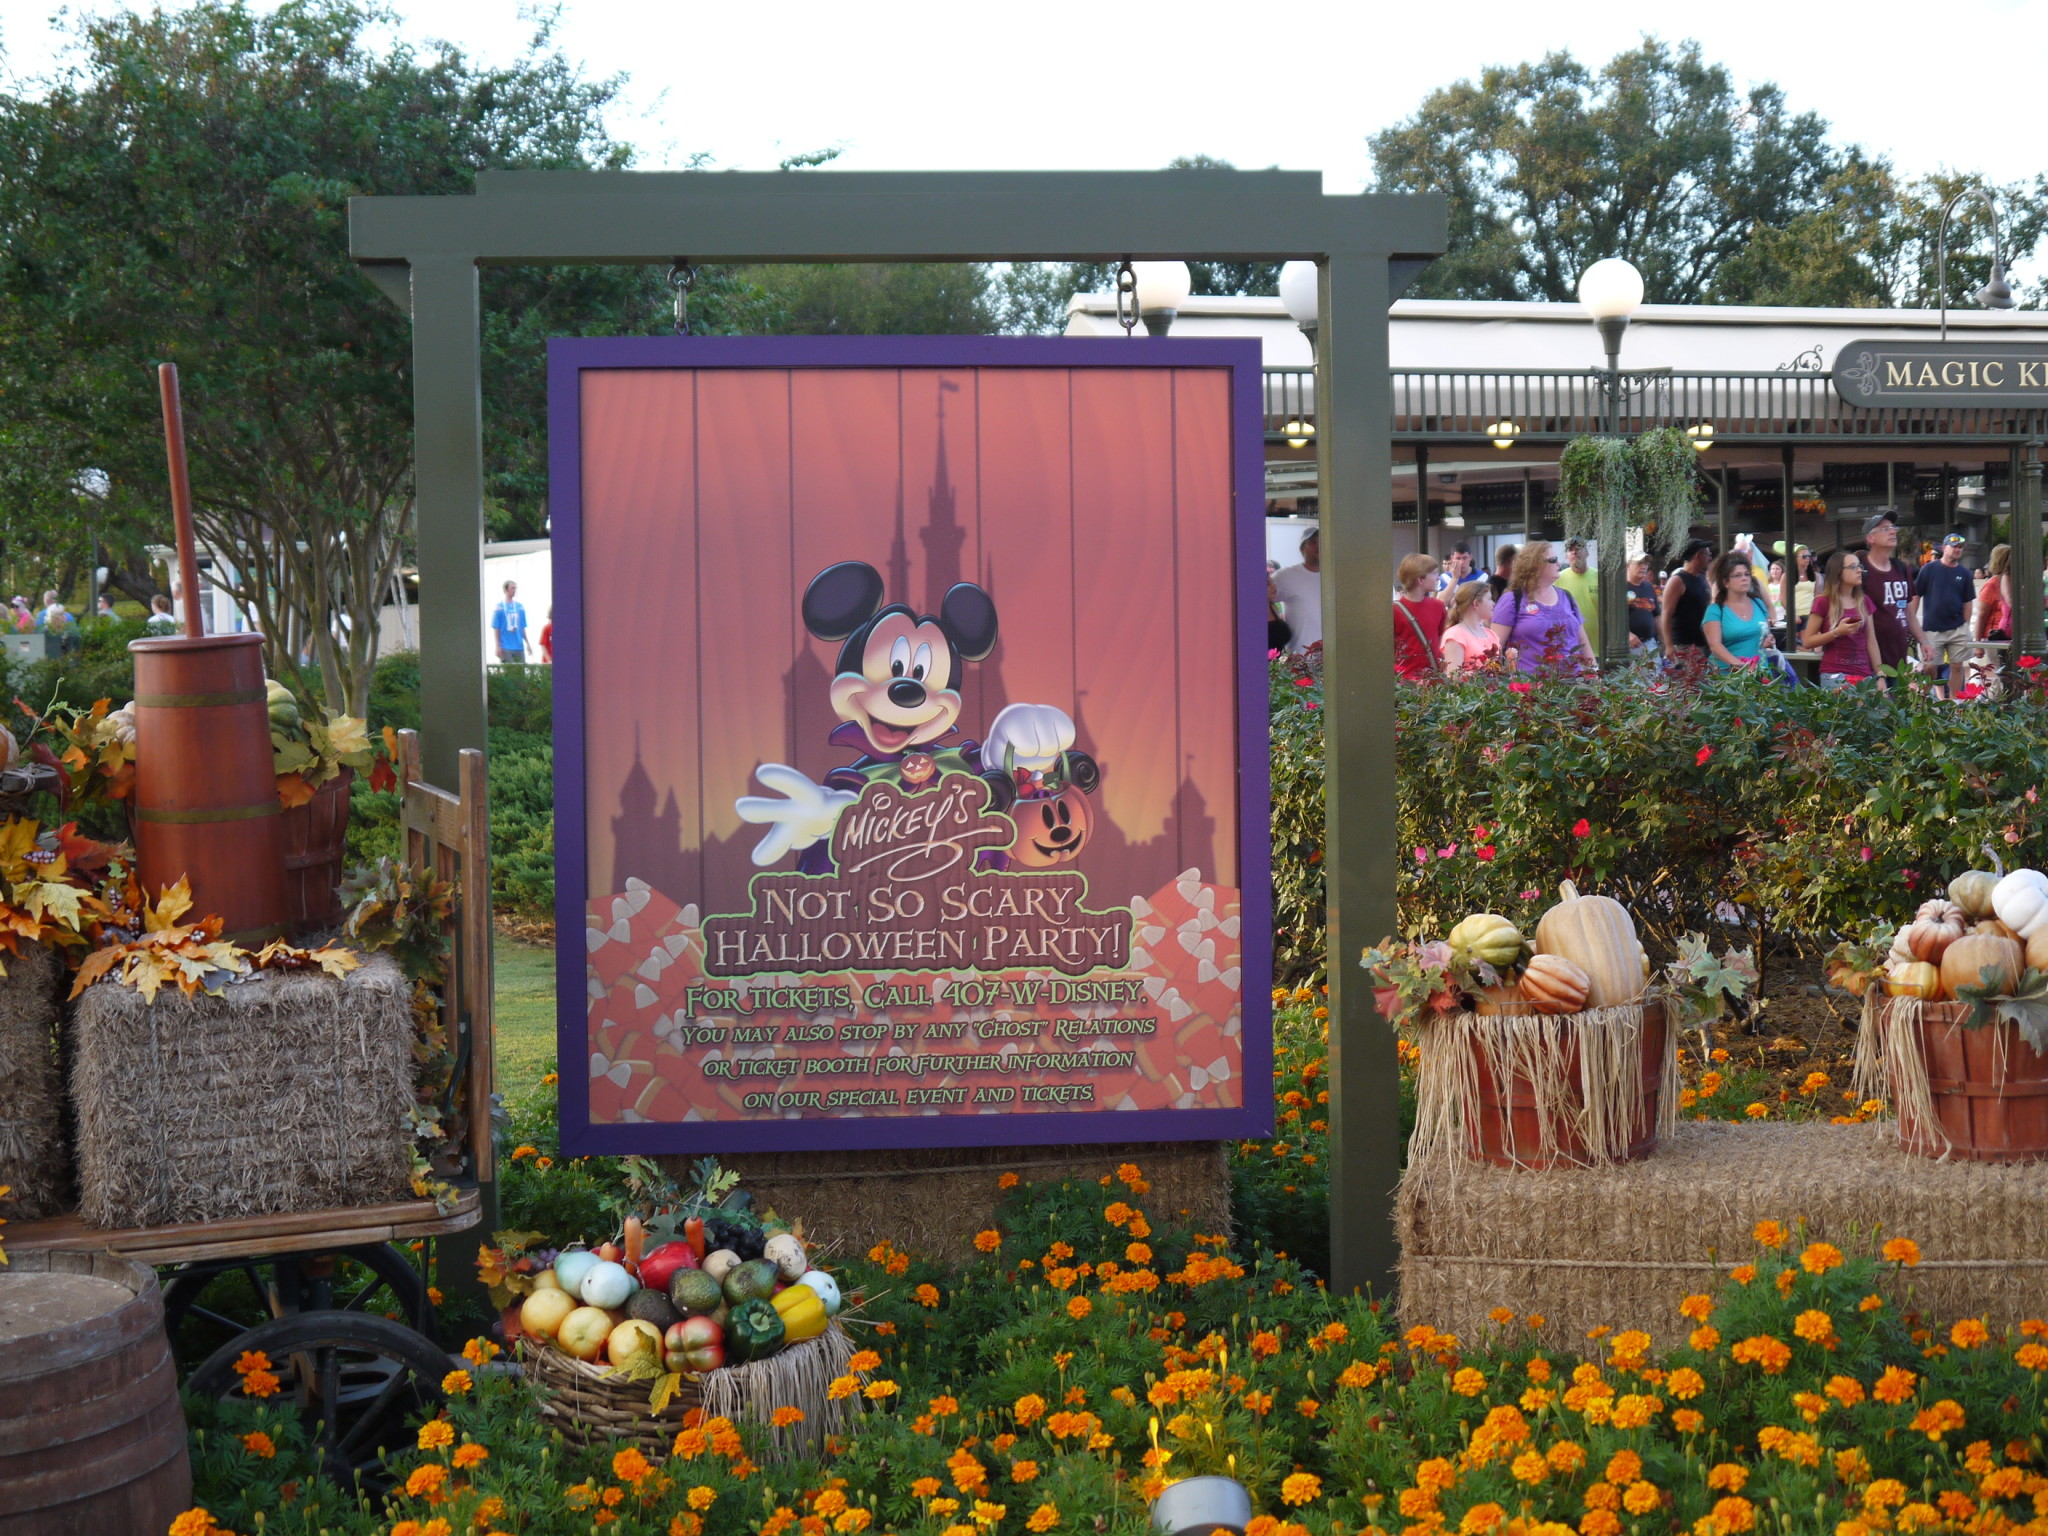 MNSSHP and MVMCP Tickets are on Sale Now!